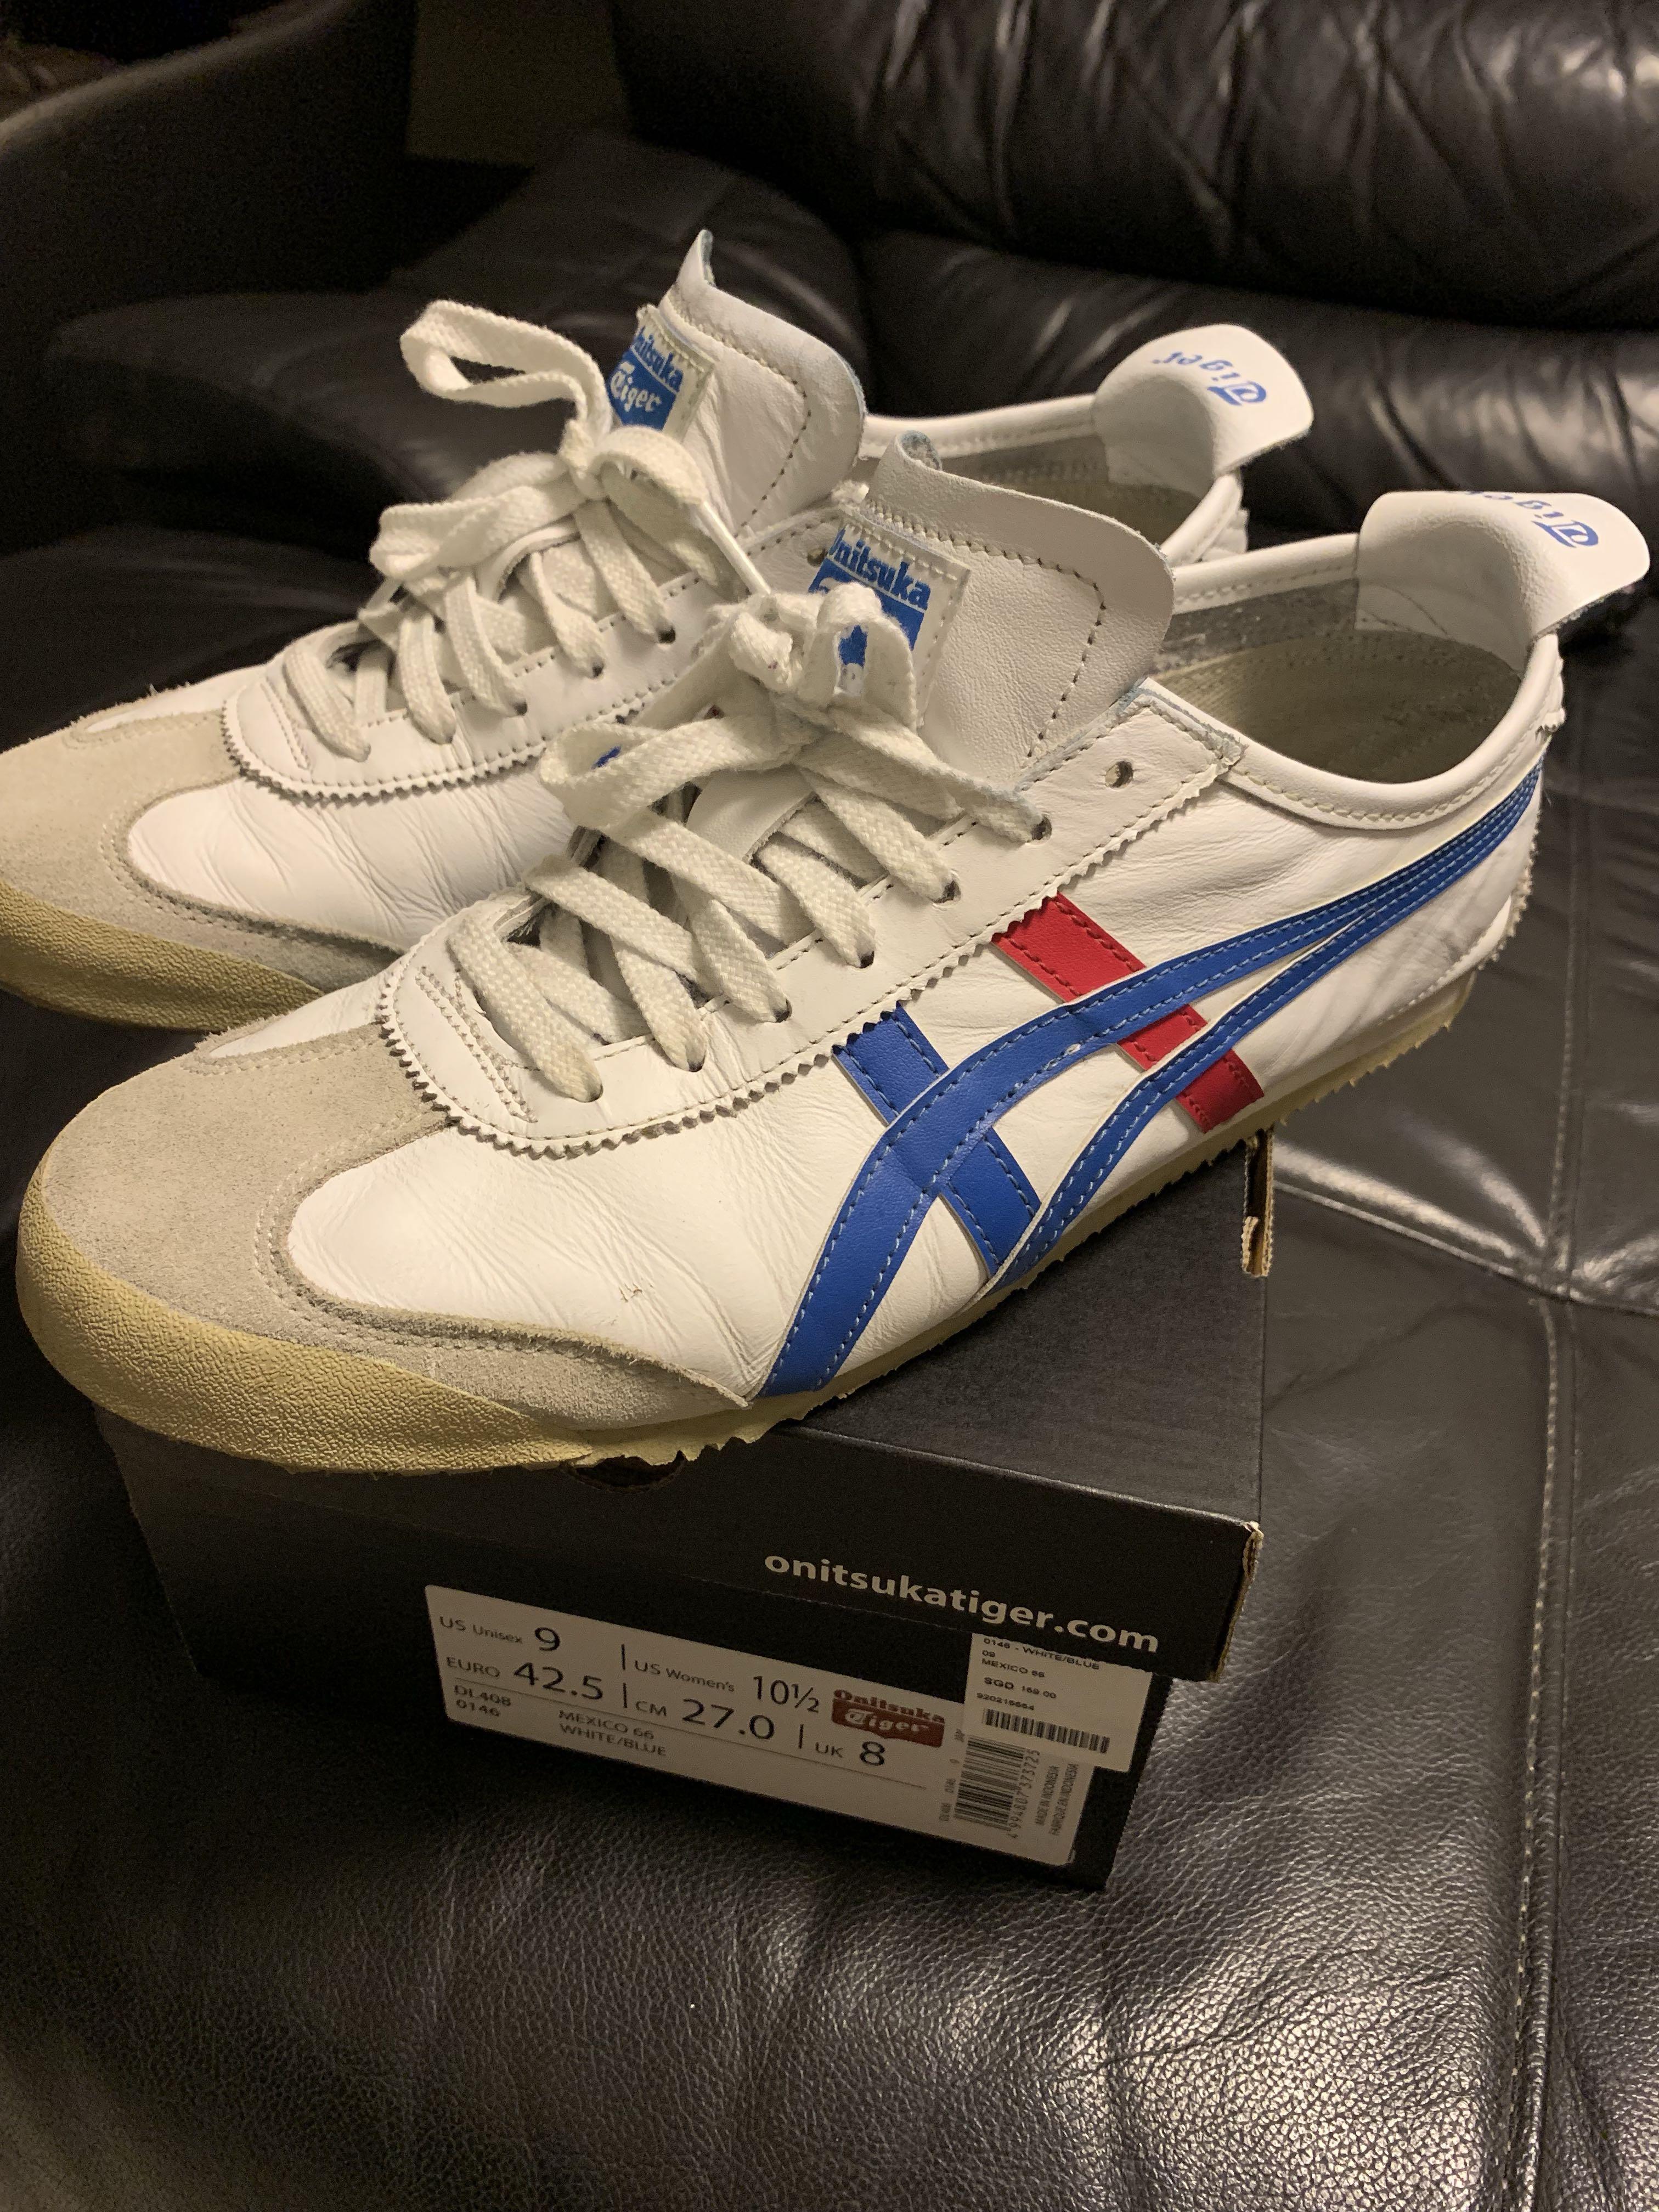 onitsuka tiger mexico 66 white red